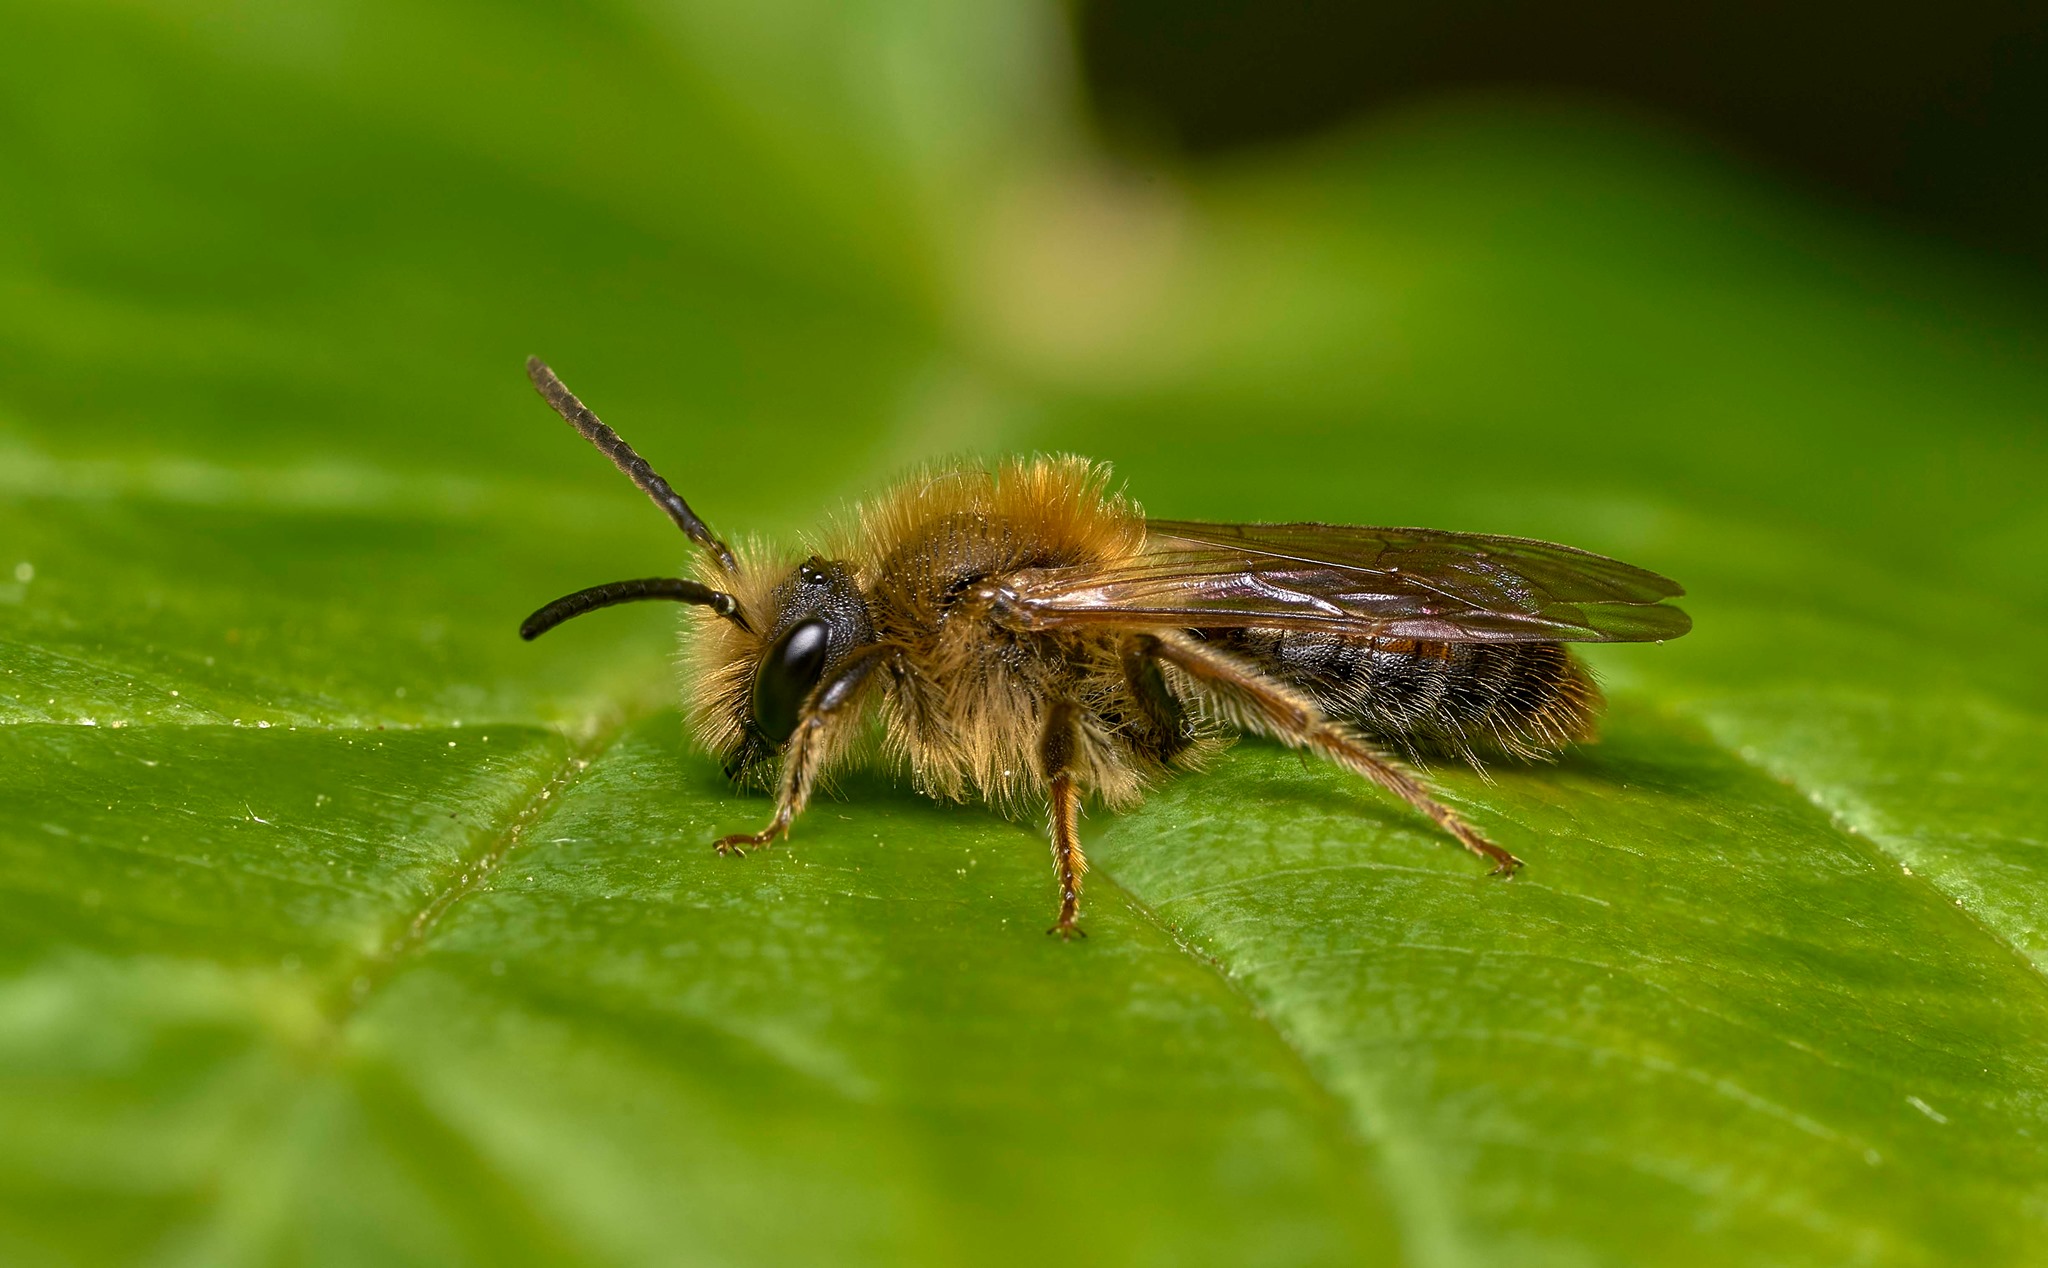 Female chocolate mining bee Andrena scotica resting on sycamore leaf